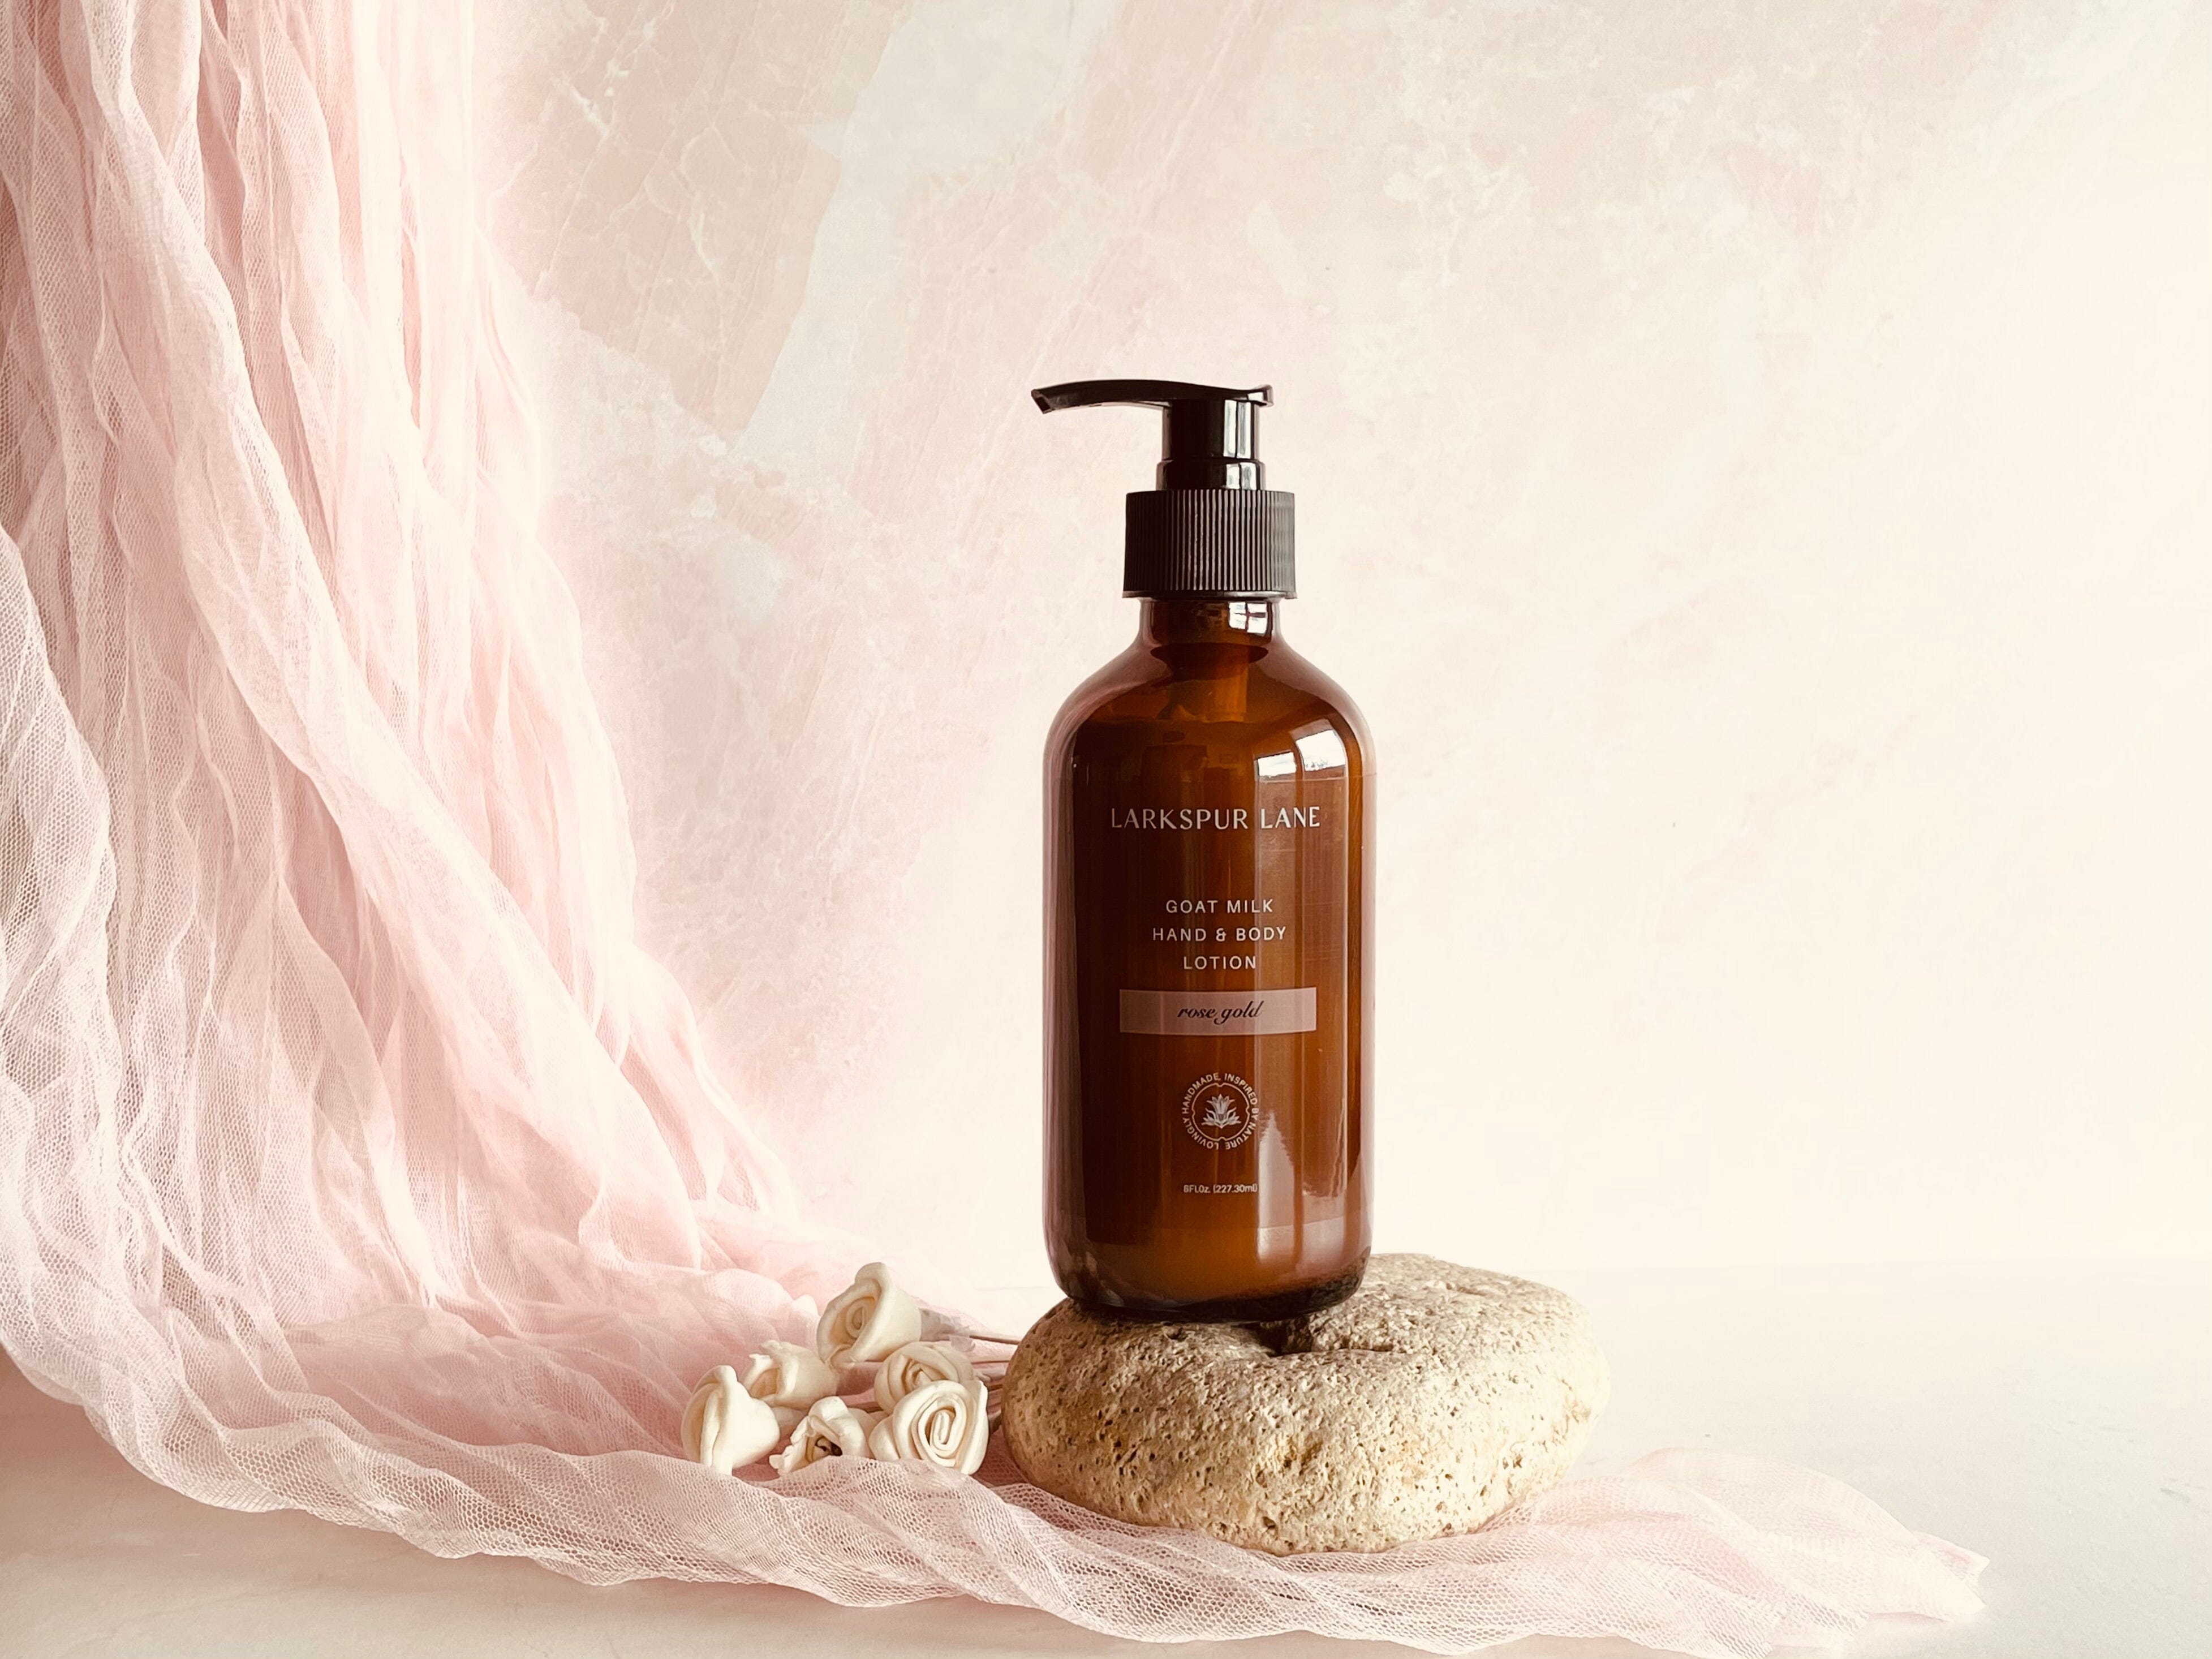 Rose Gold Goat Milk Hand & Body Lotion hand and body lotion LarkspurLaneSoapsandsundries 